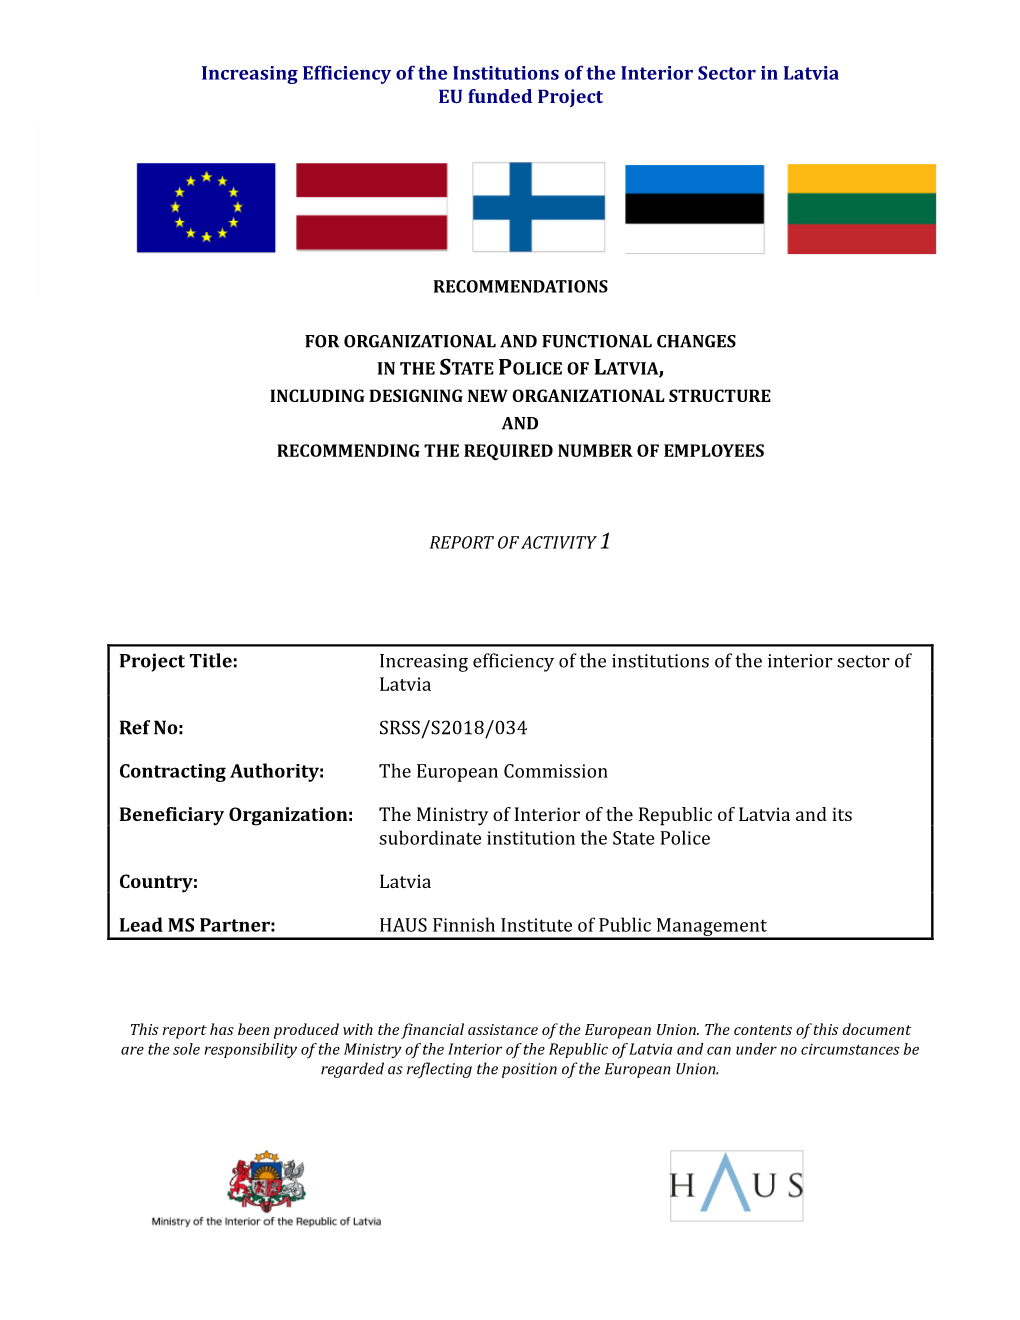 Increasing Efficiency of the Institutions of the Interior Sector in Latvia EU Funded Project